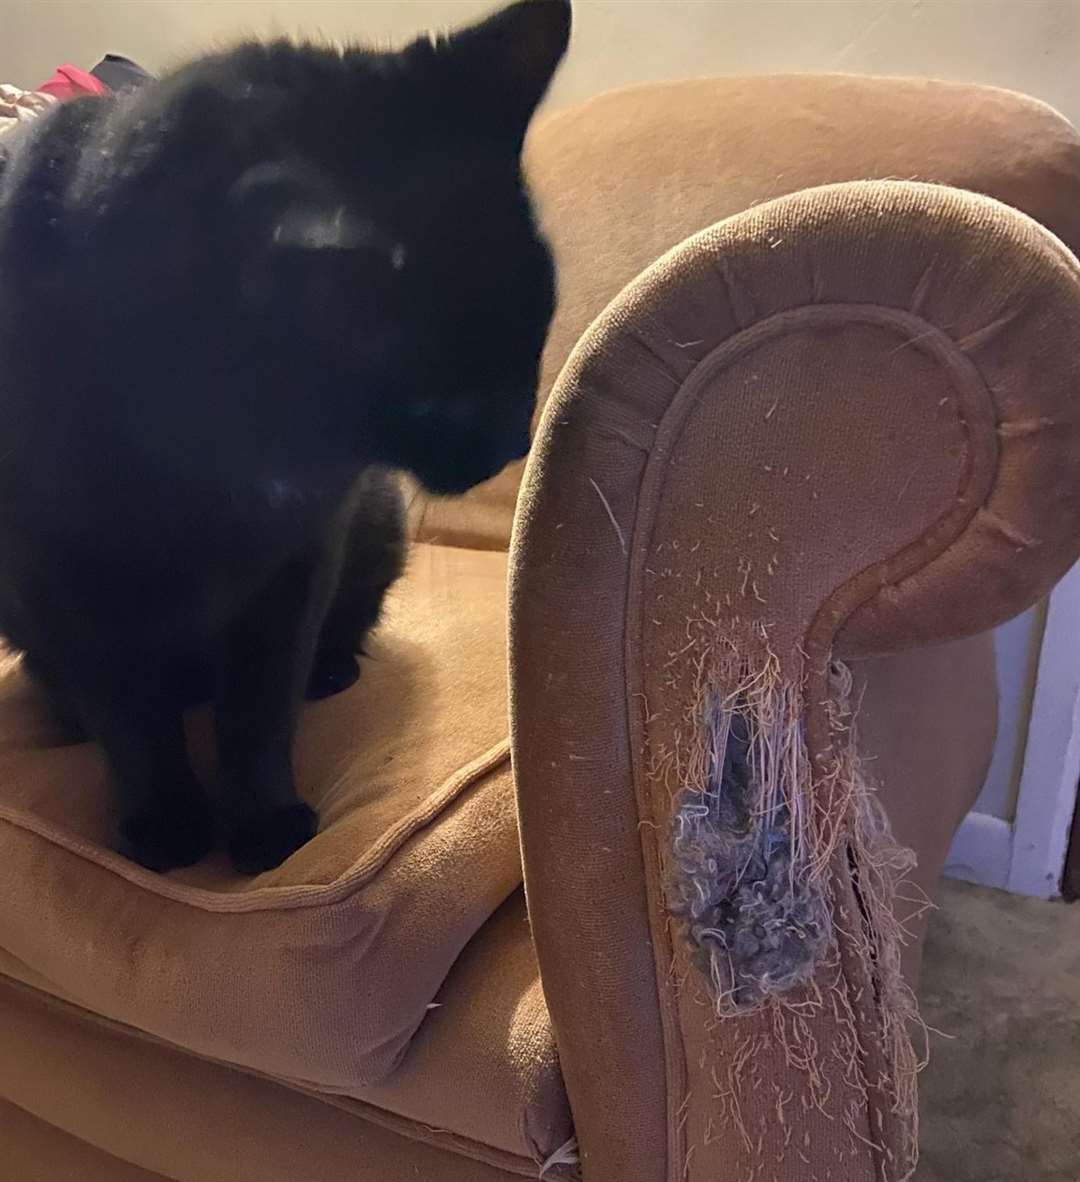 This black cat, a runner-up in the competition, likes to use her owner's sofa as a chew toy